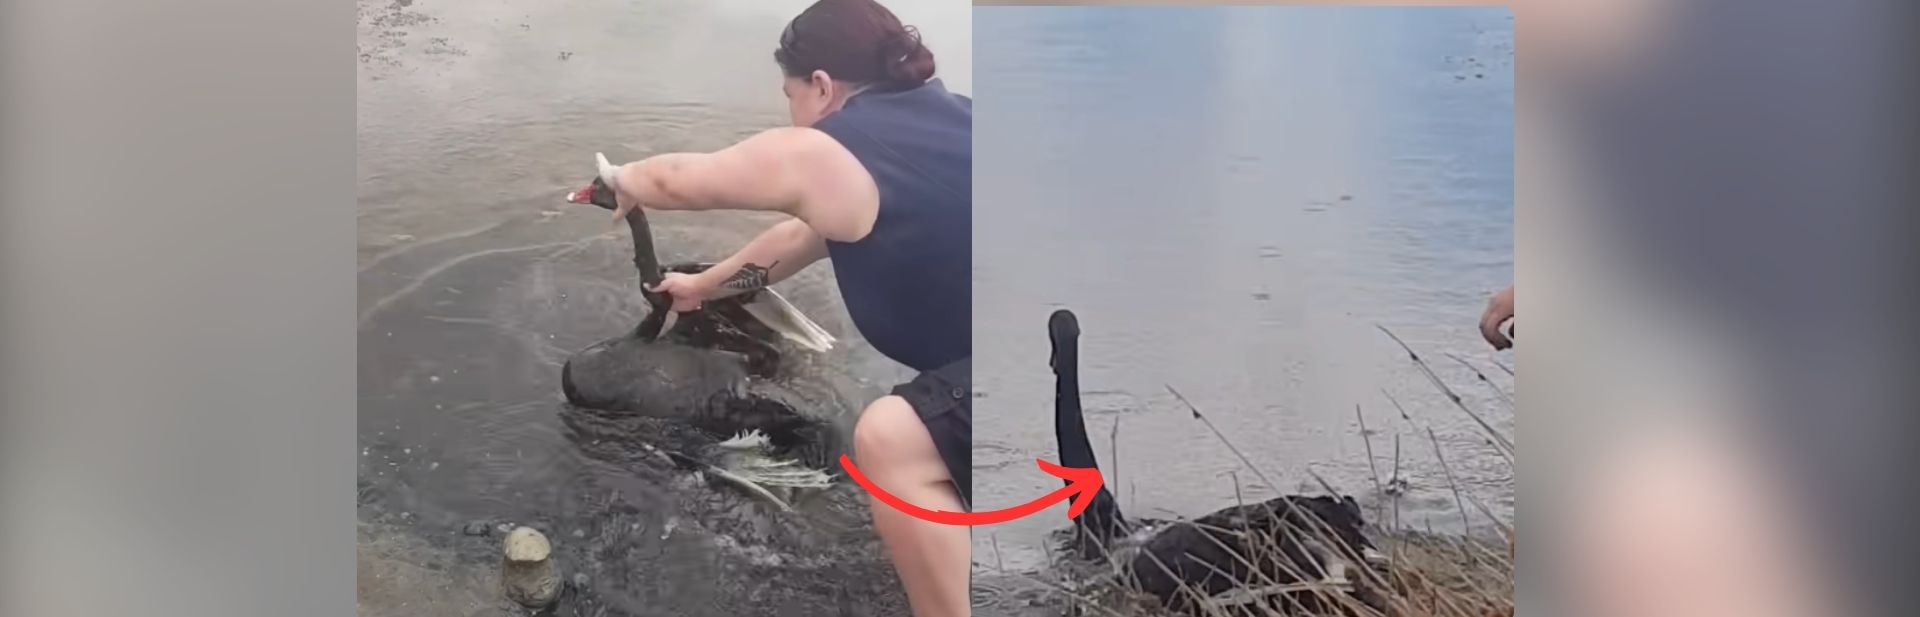 Swan Defeats Paralysis, But It’s Her Homecoming That’ll Make You Cry